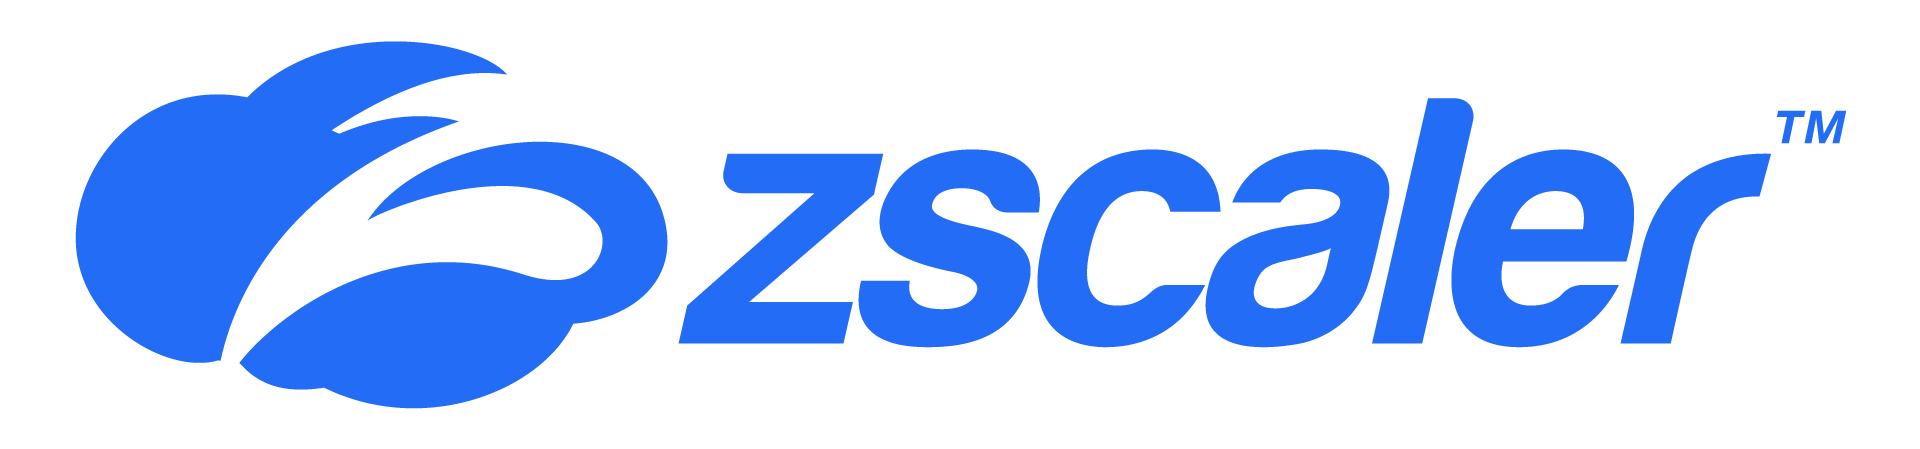 New_Zscaler-Logo.png